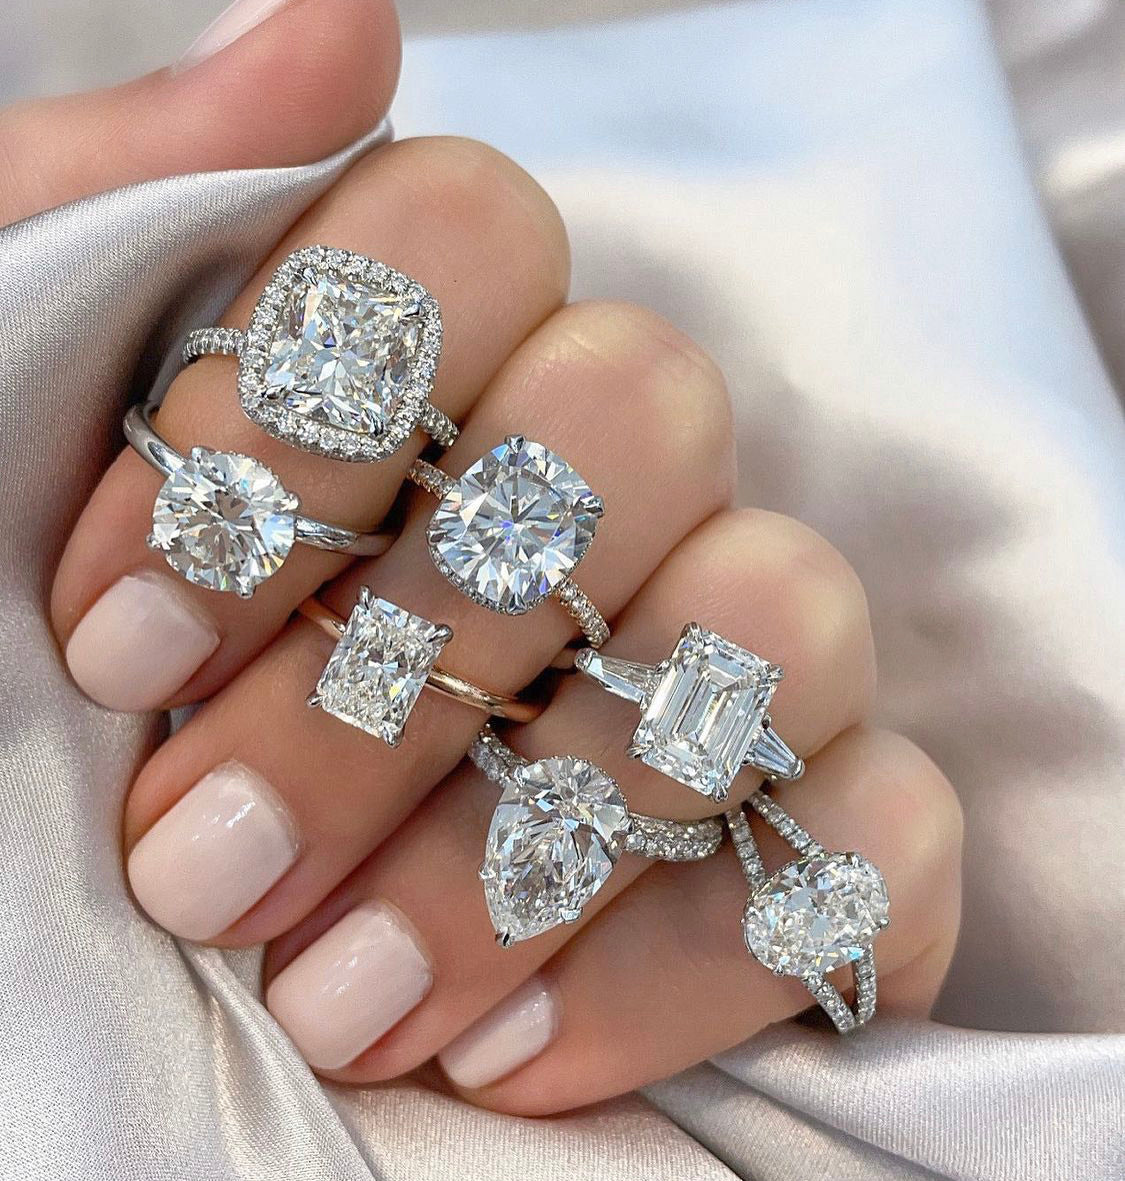 Three Things You Need to Know About Diamonds Before You Buy an Engagement Ring